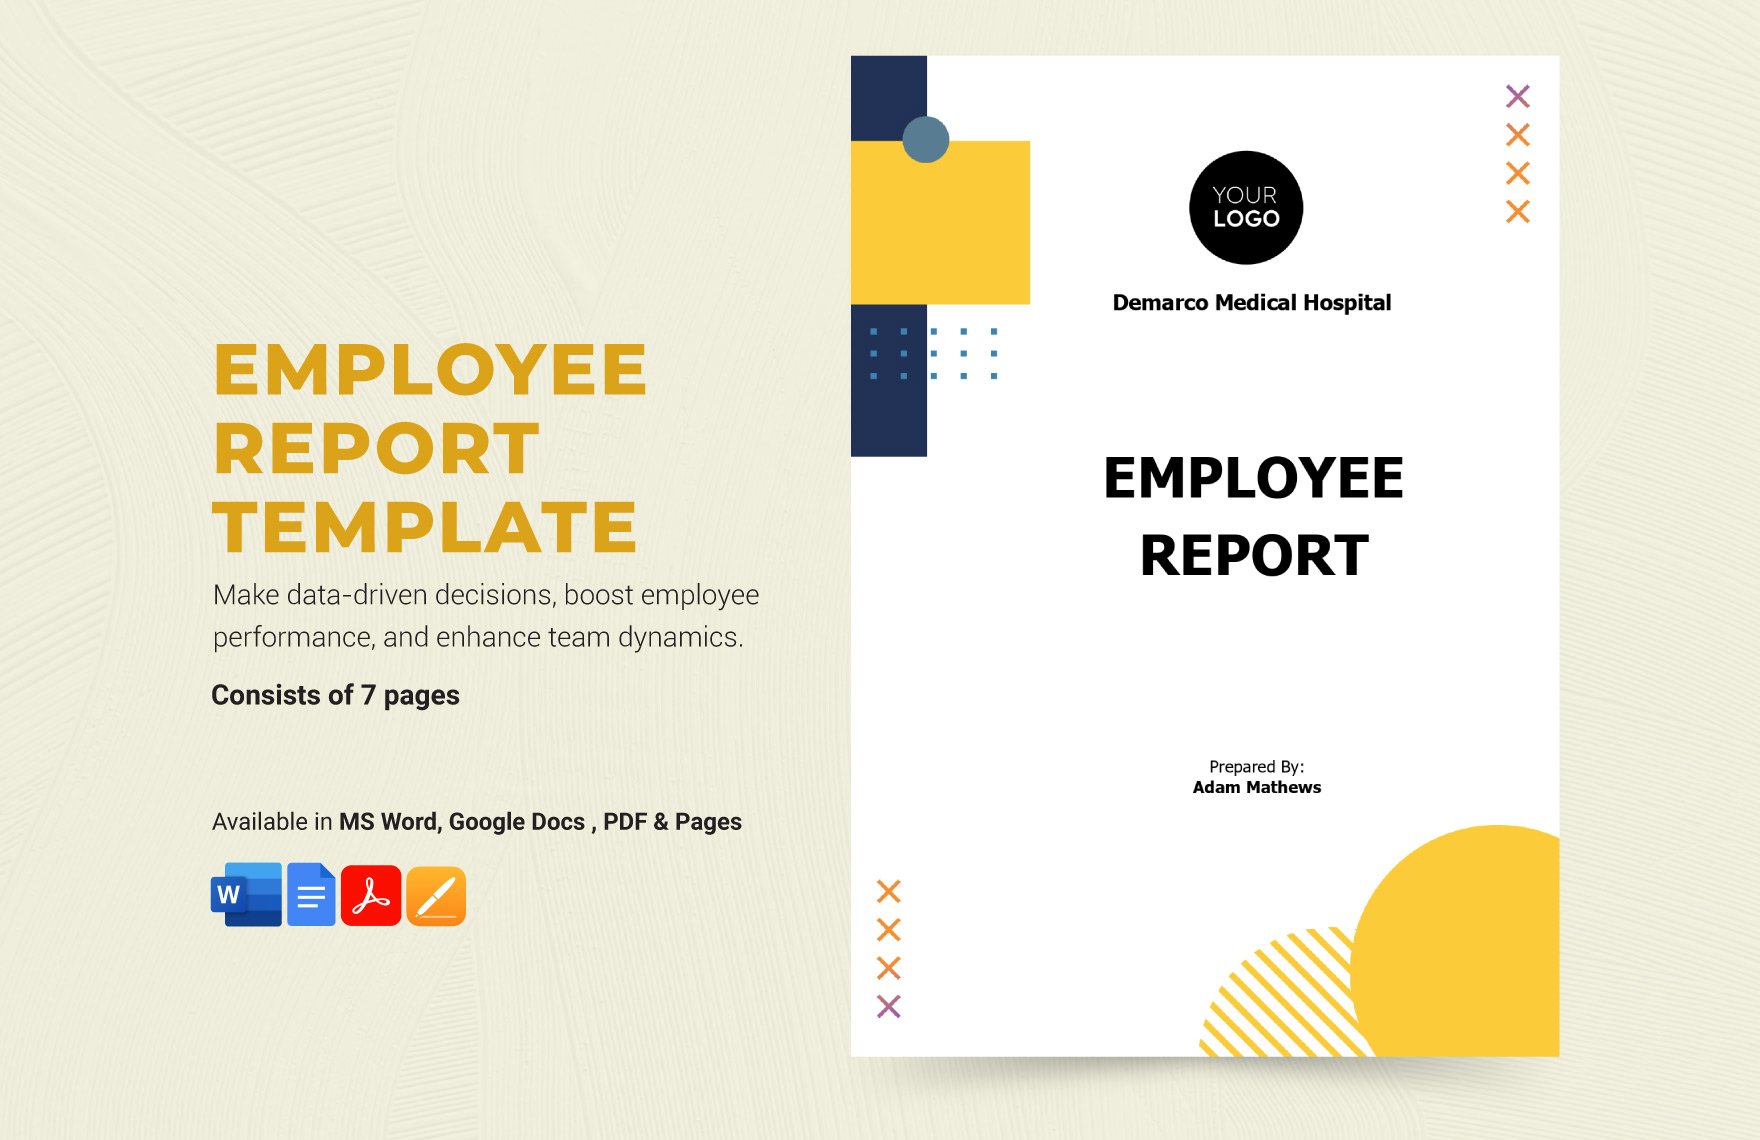 Employee Report Template in Word, Google Docs, PDF, Apple Pages